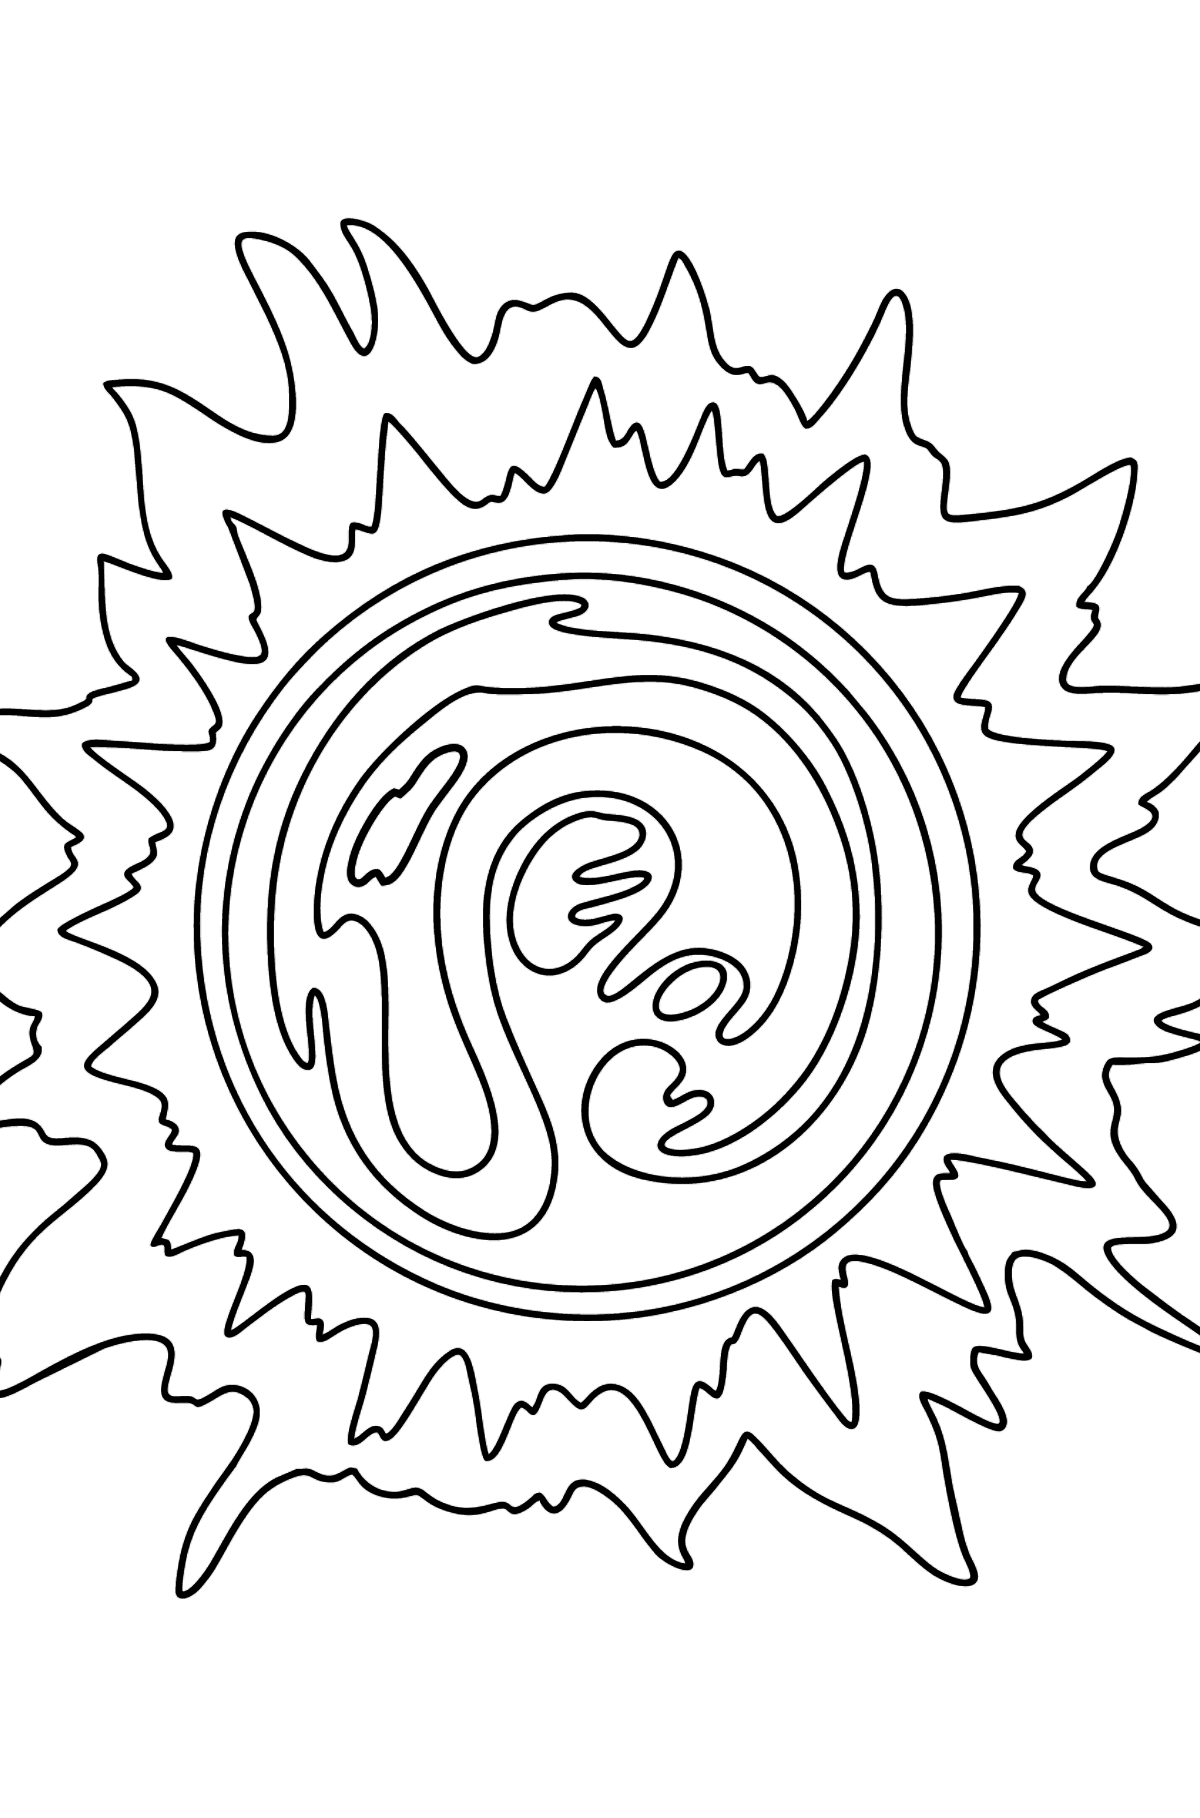 Sun coloring page - Coloring Pages for Kids